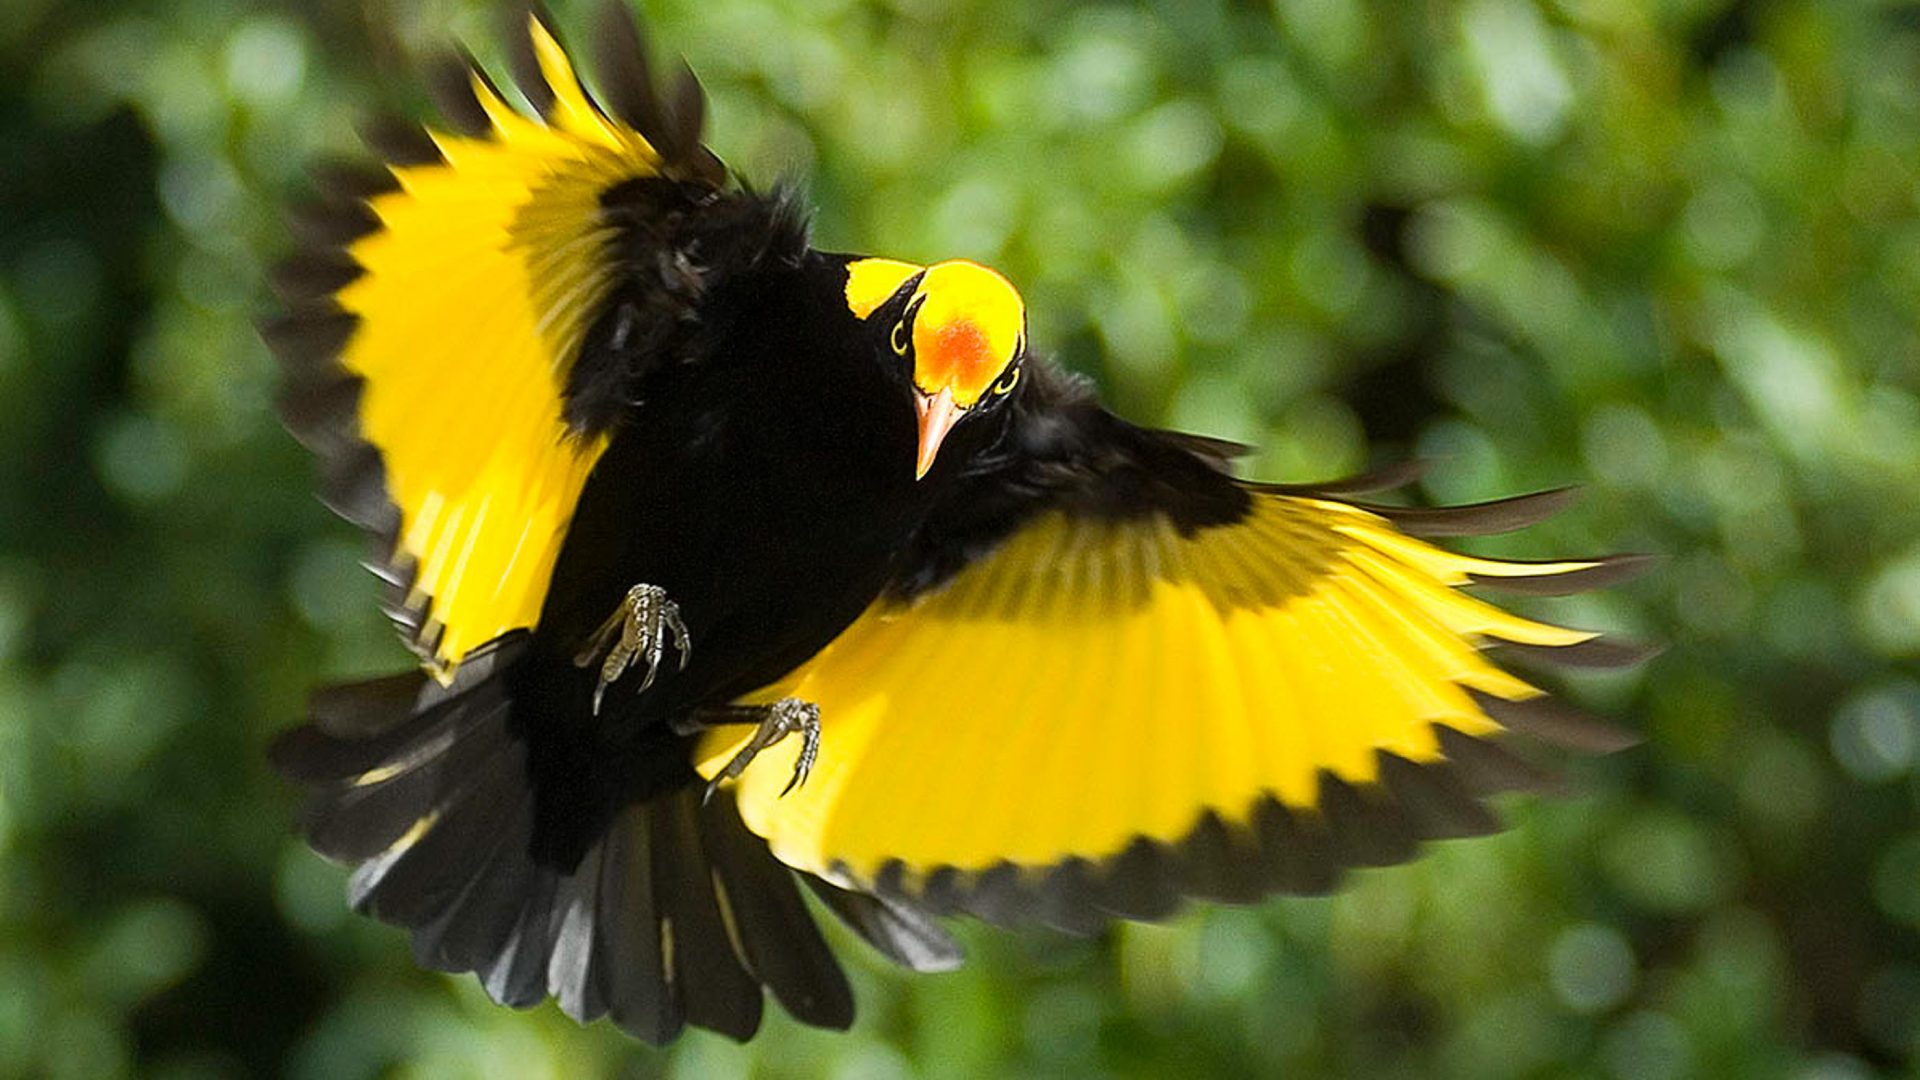 Yellow and black bird with wings outstretched.